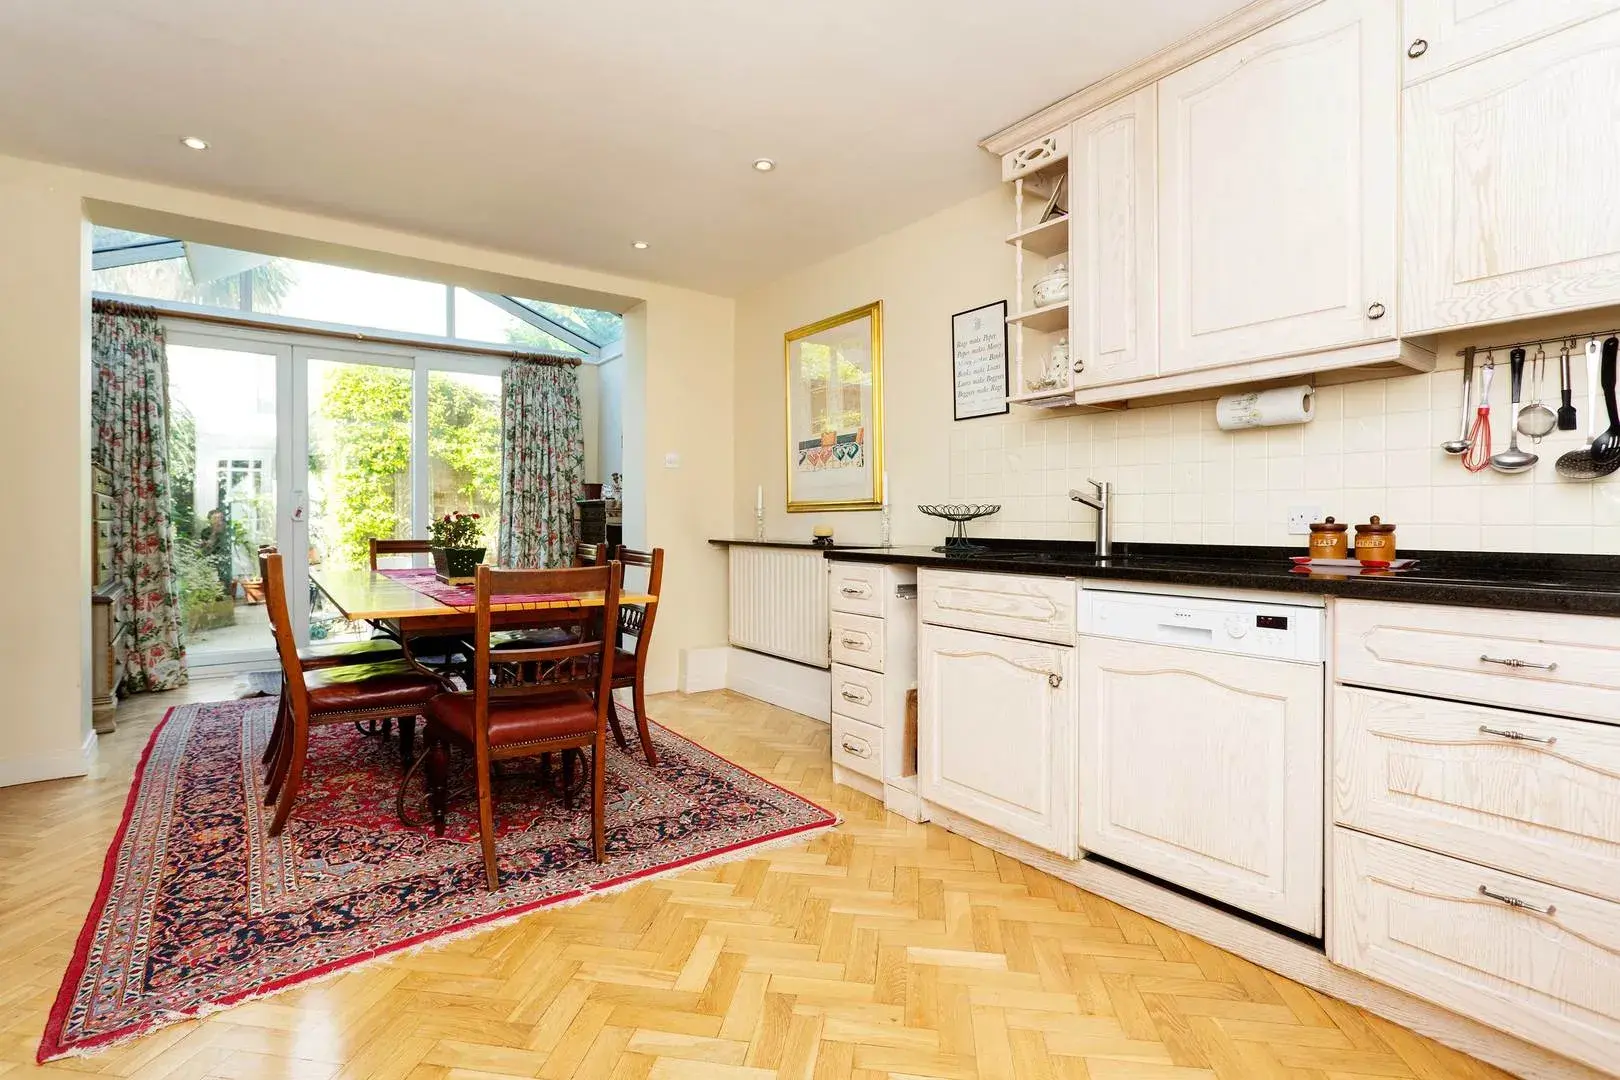 Clareville Grove, holiday home in Kensington, London